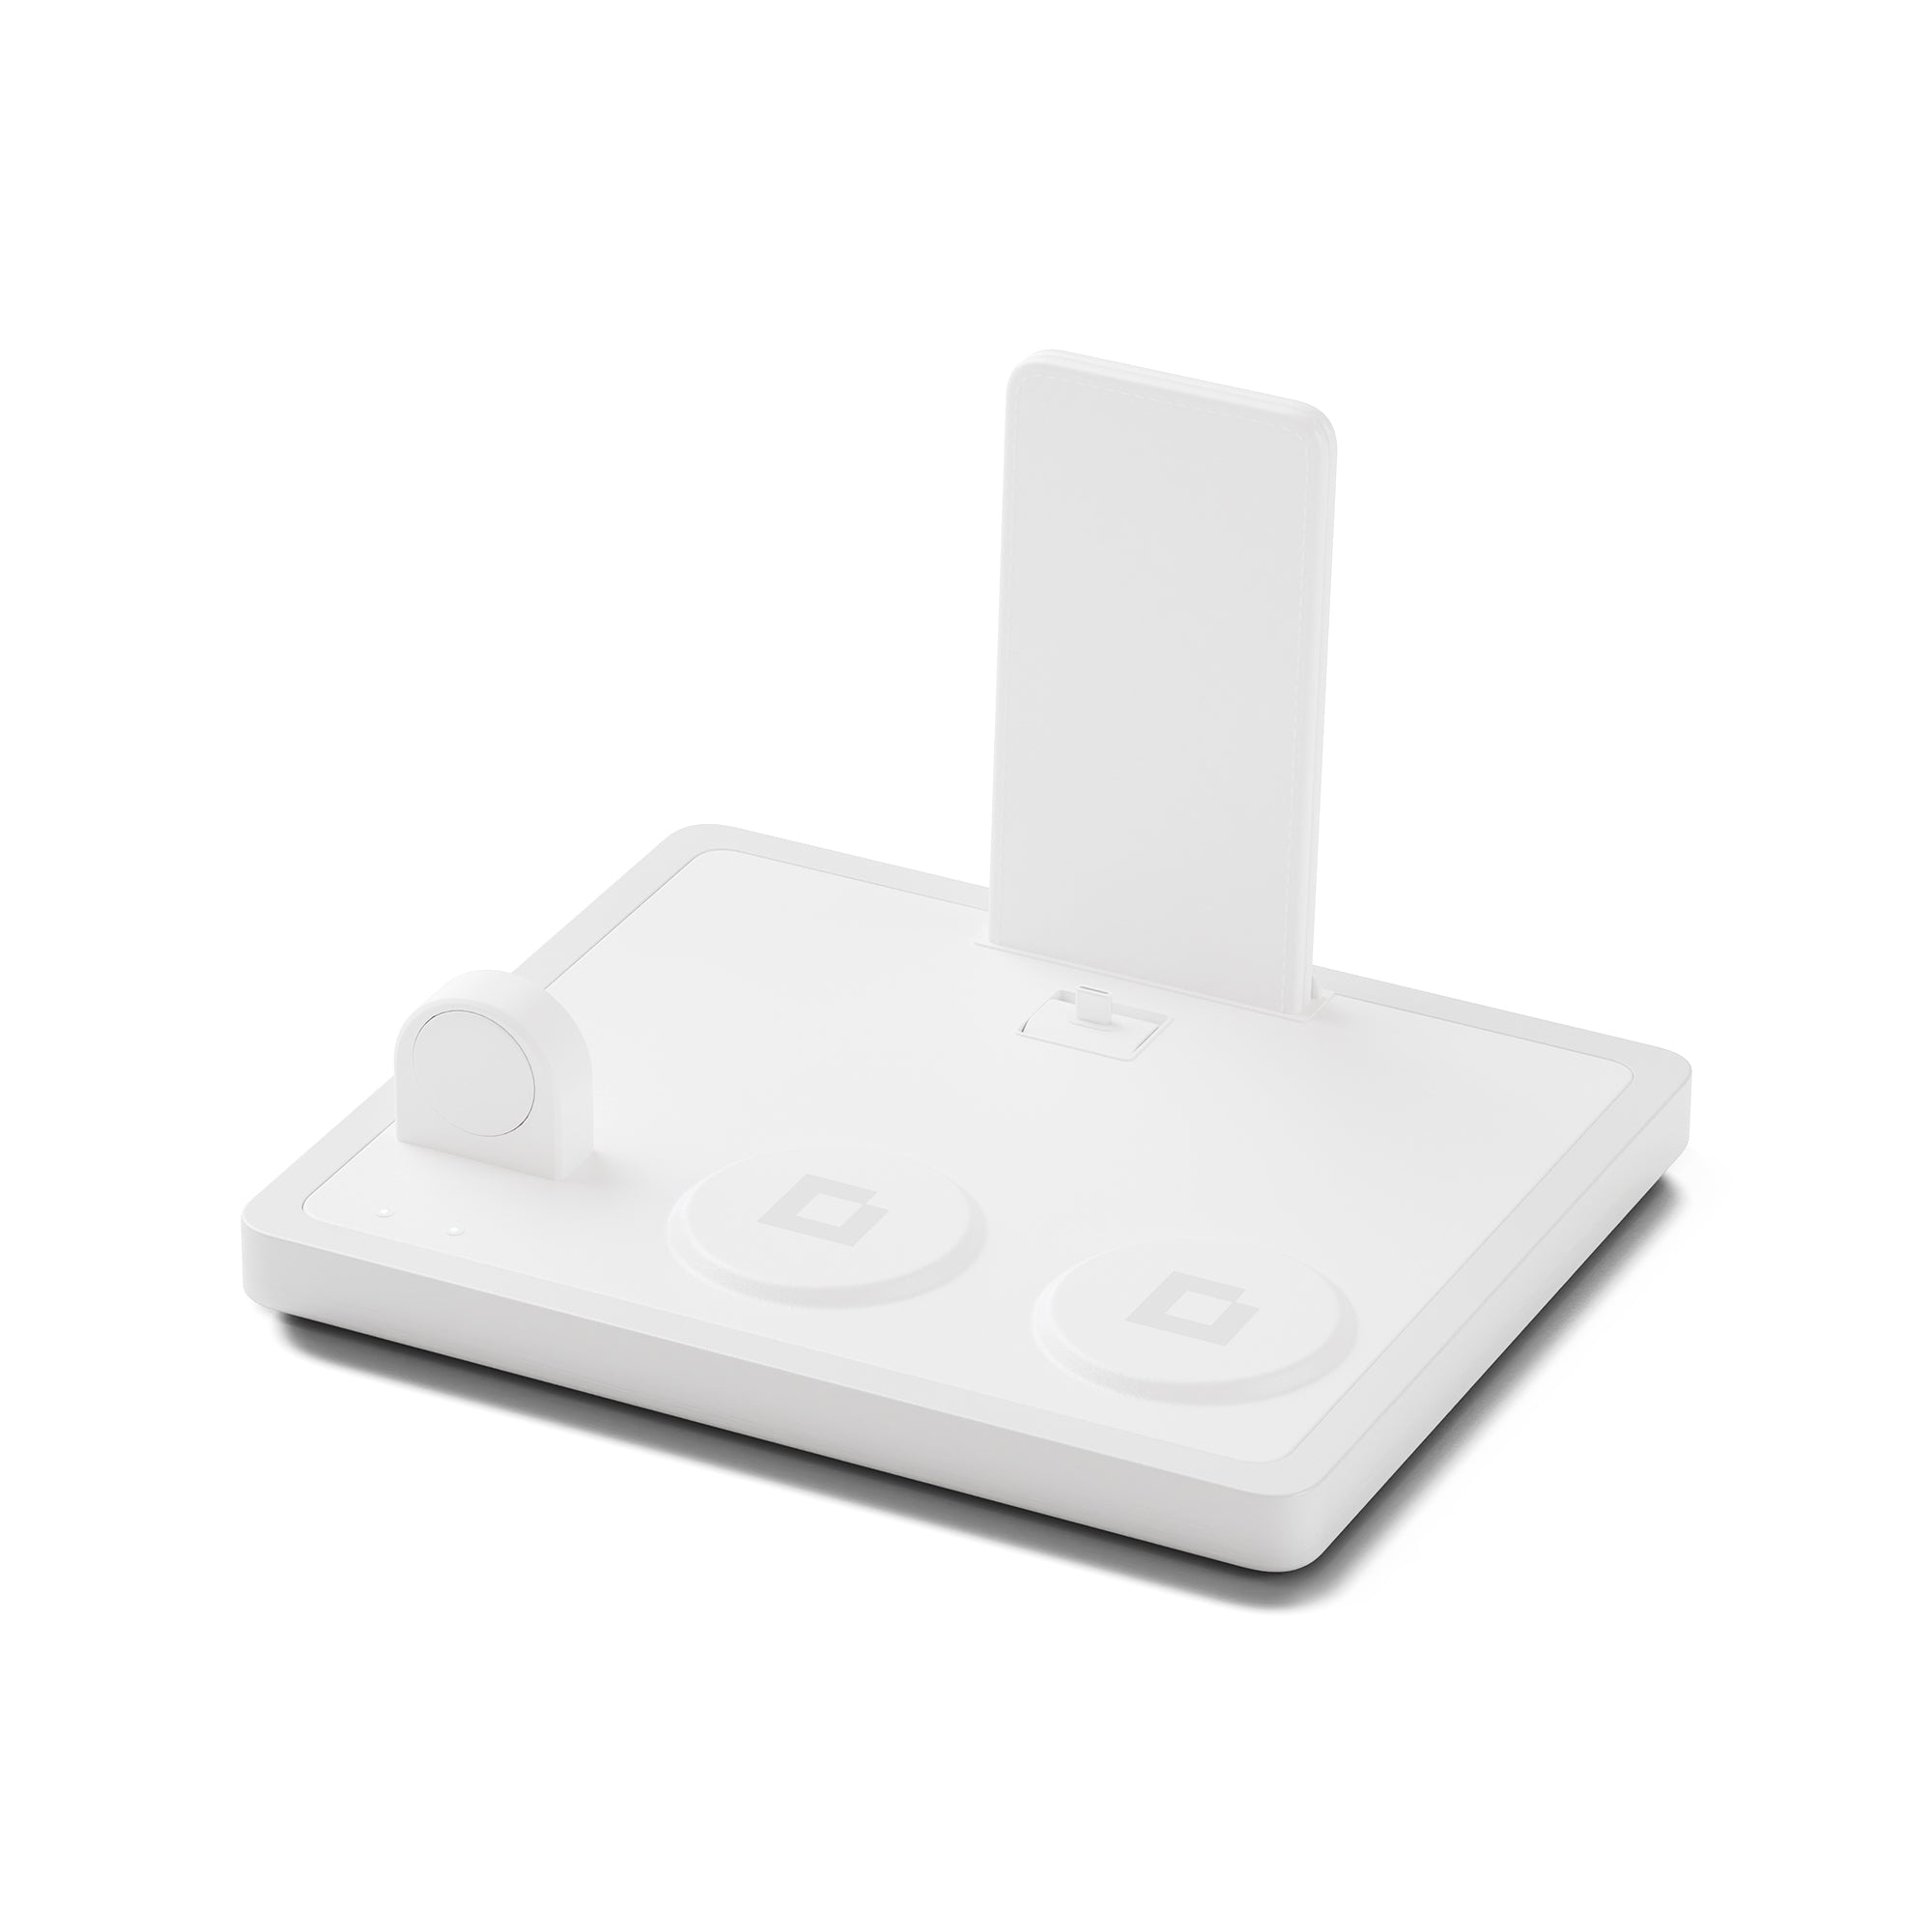 QUAD White - 4-in-1 MagSafe Rustic White Wireless Charger with iPad Stand Support